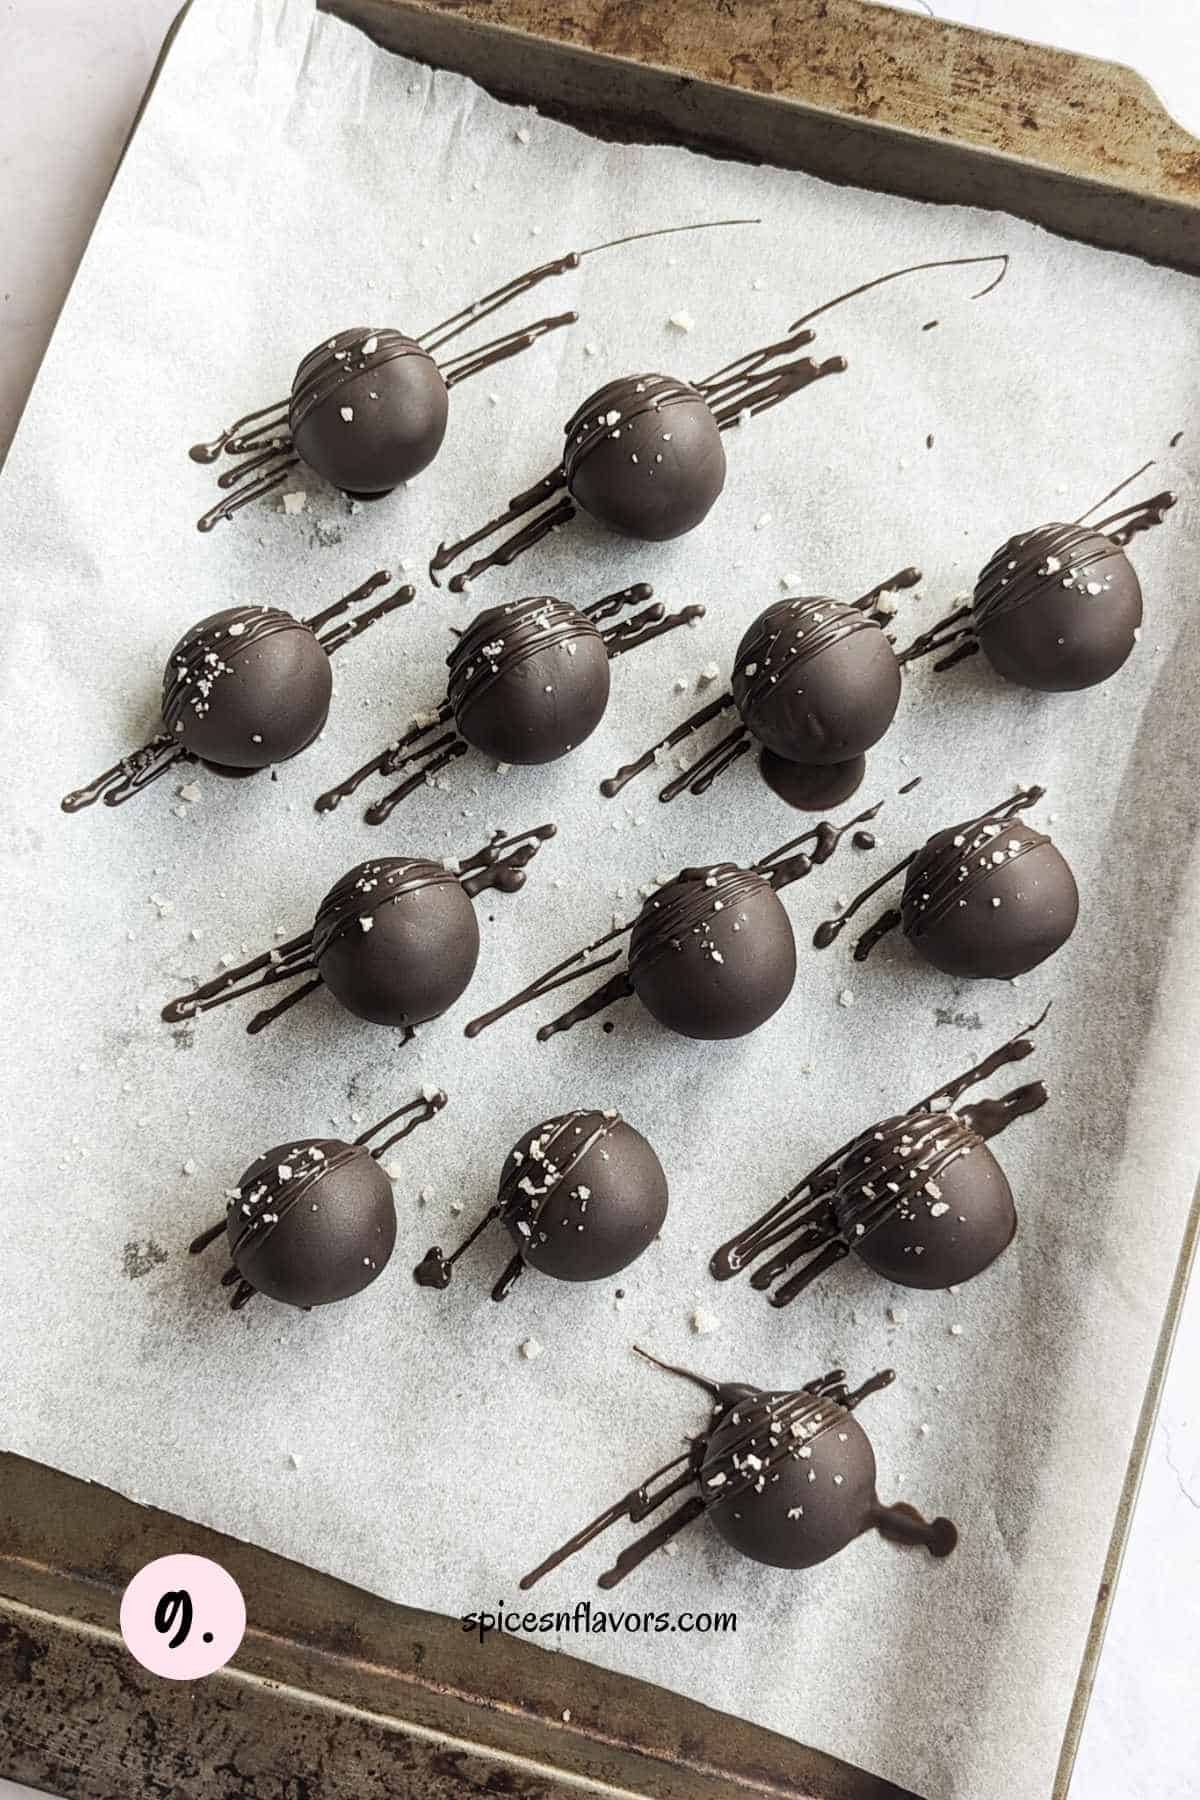 drizzle the dough balls with chocolate and sprinkle sea salt